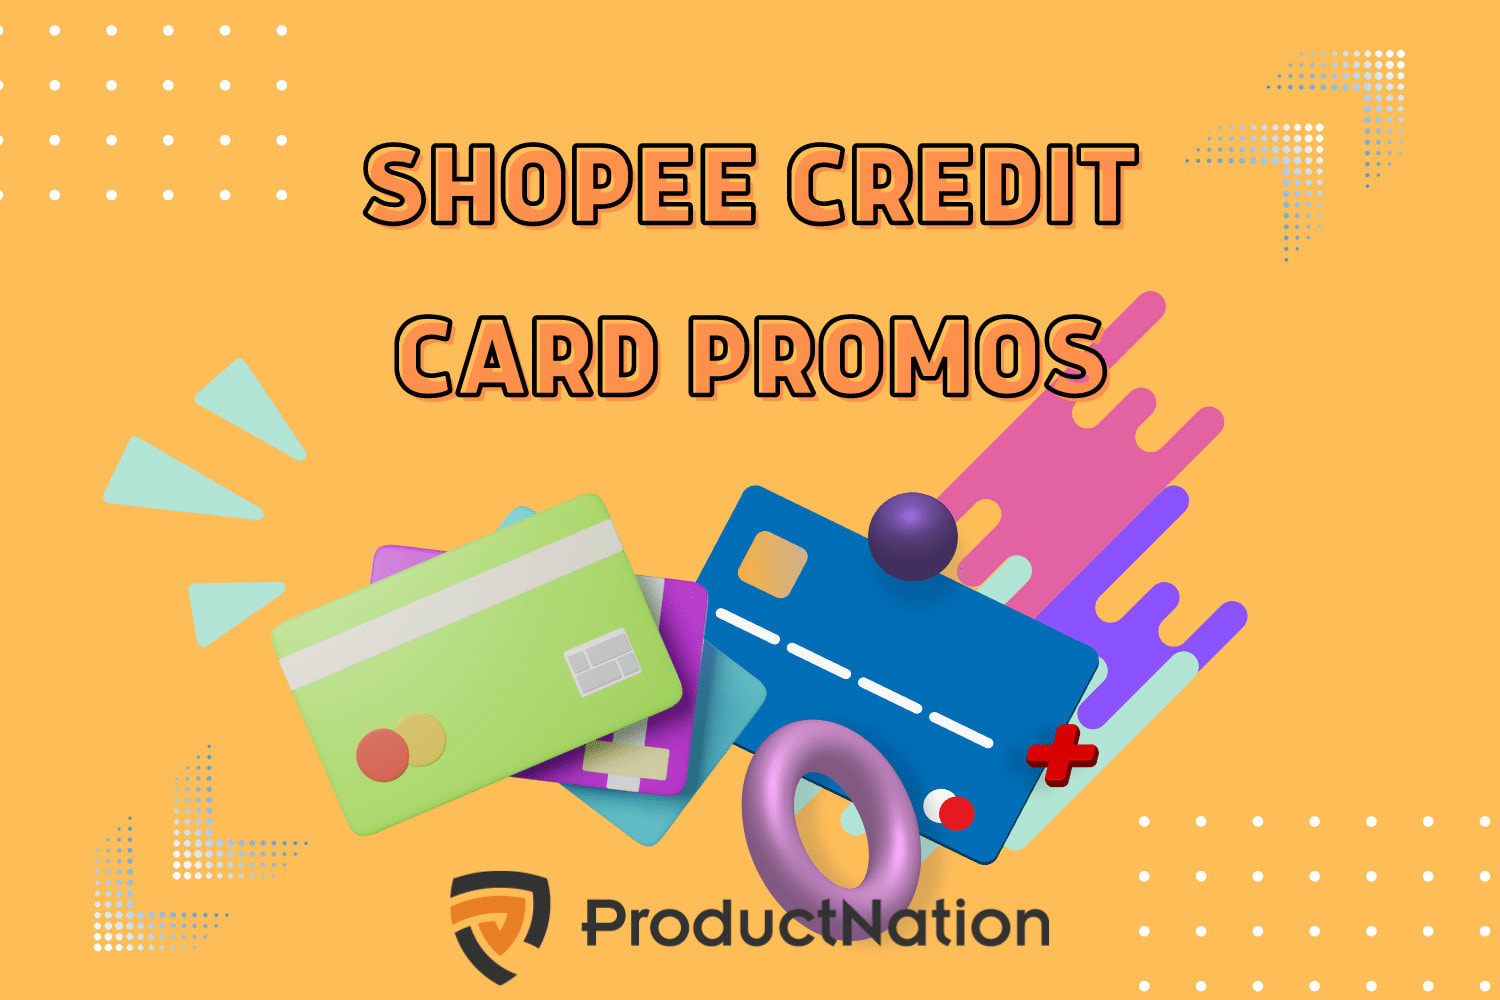 shopee-credit-card-promos-philippines